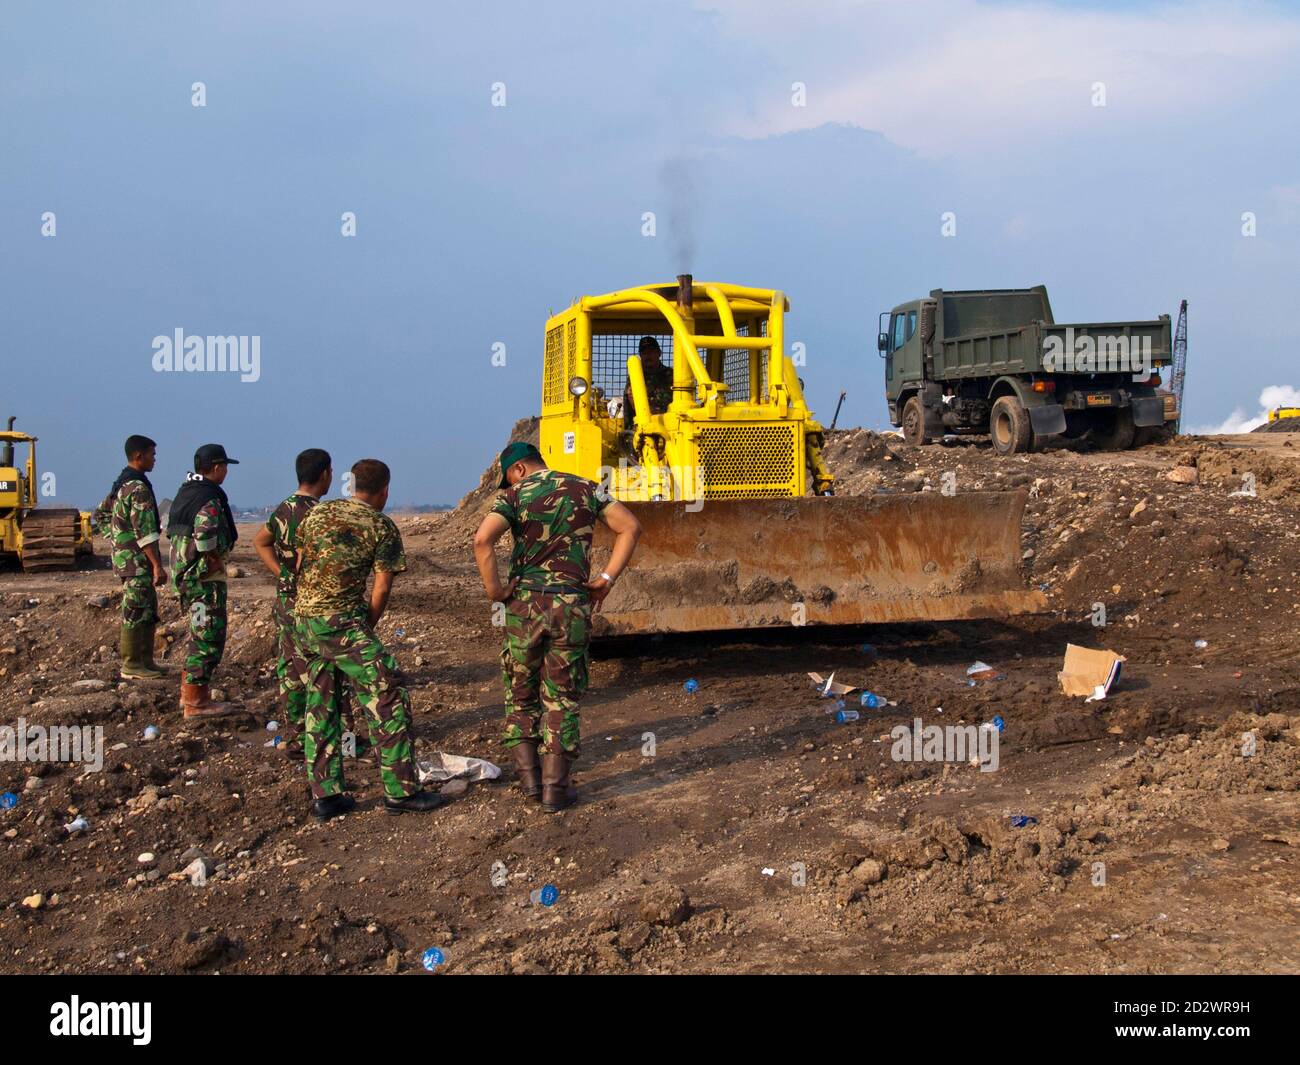 SIRING, SURABAYA, JAVA, INDONESIA - FEB 22, 2007: Catepiller and soldiers on a dam which was built to prevent the village of Siring near Surabaya,  Ja Stock Photo